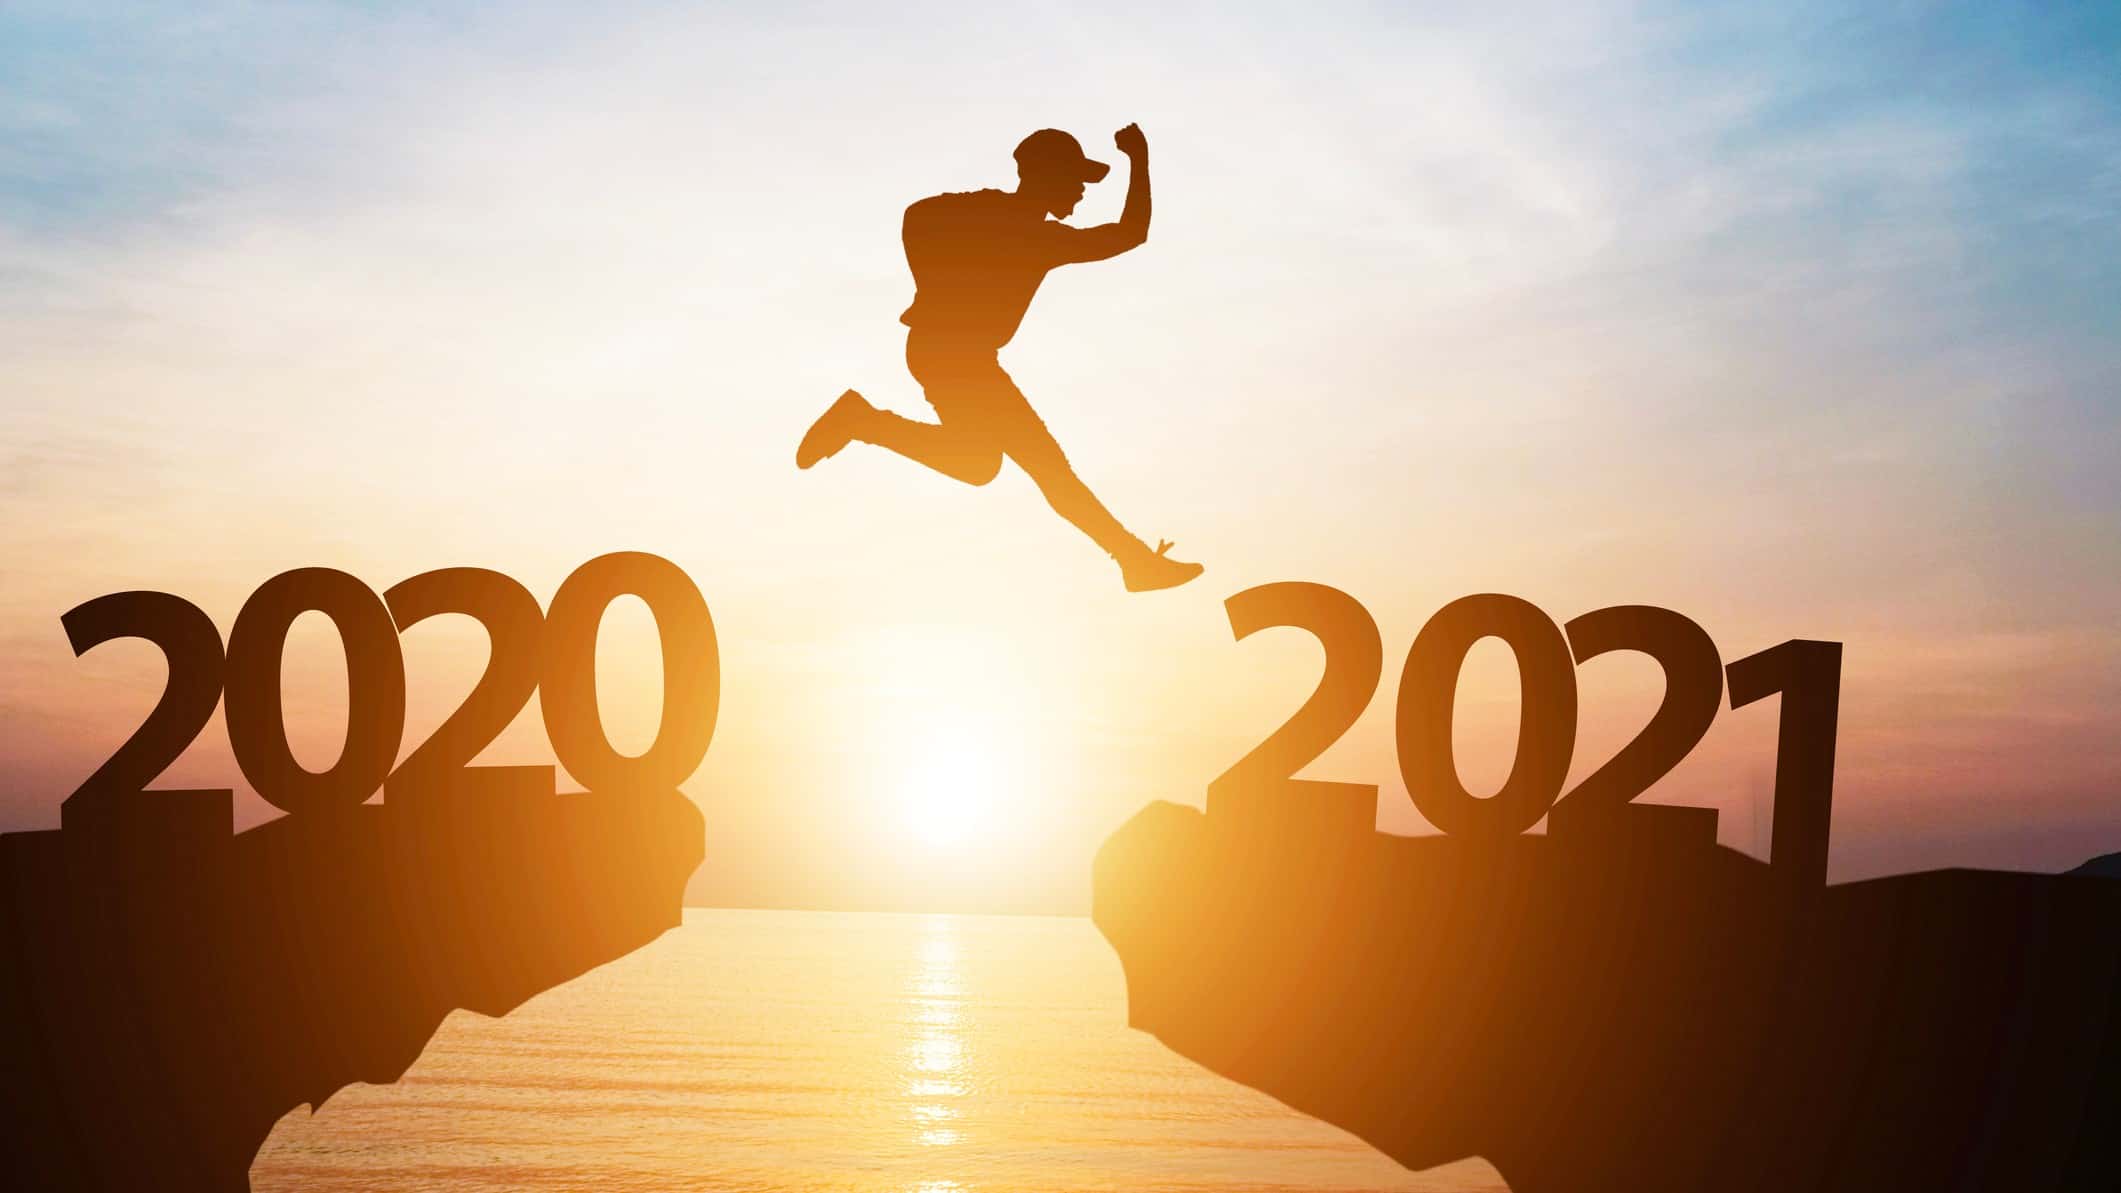 man jumping from 2020 cliff to 2021 cliff representing asx outlook 2021